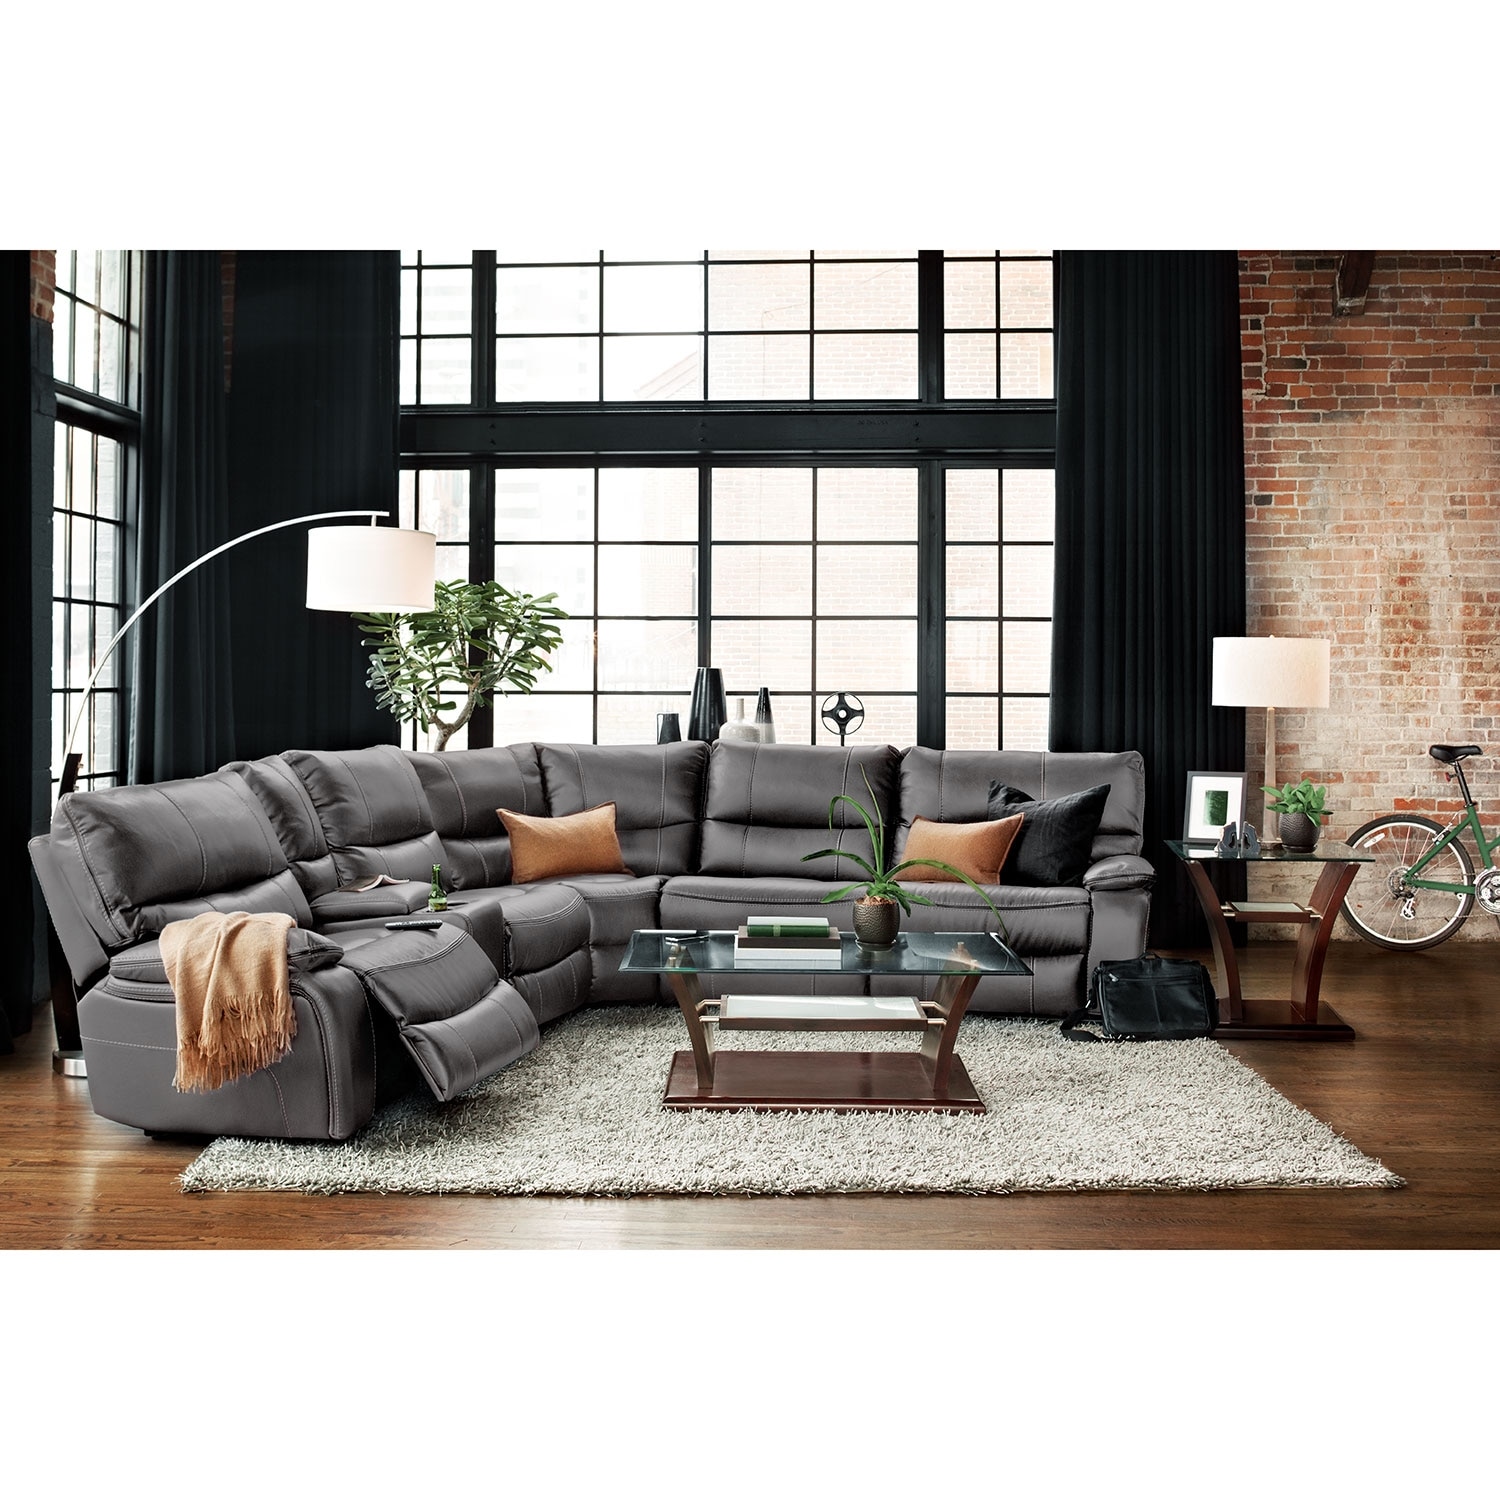 Orlando 6-Piece Power Reclining Sectional with 1 Stationary Chair - Gray | Value City Furniture